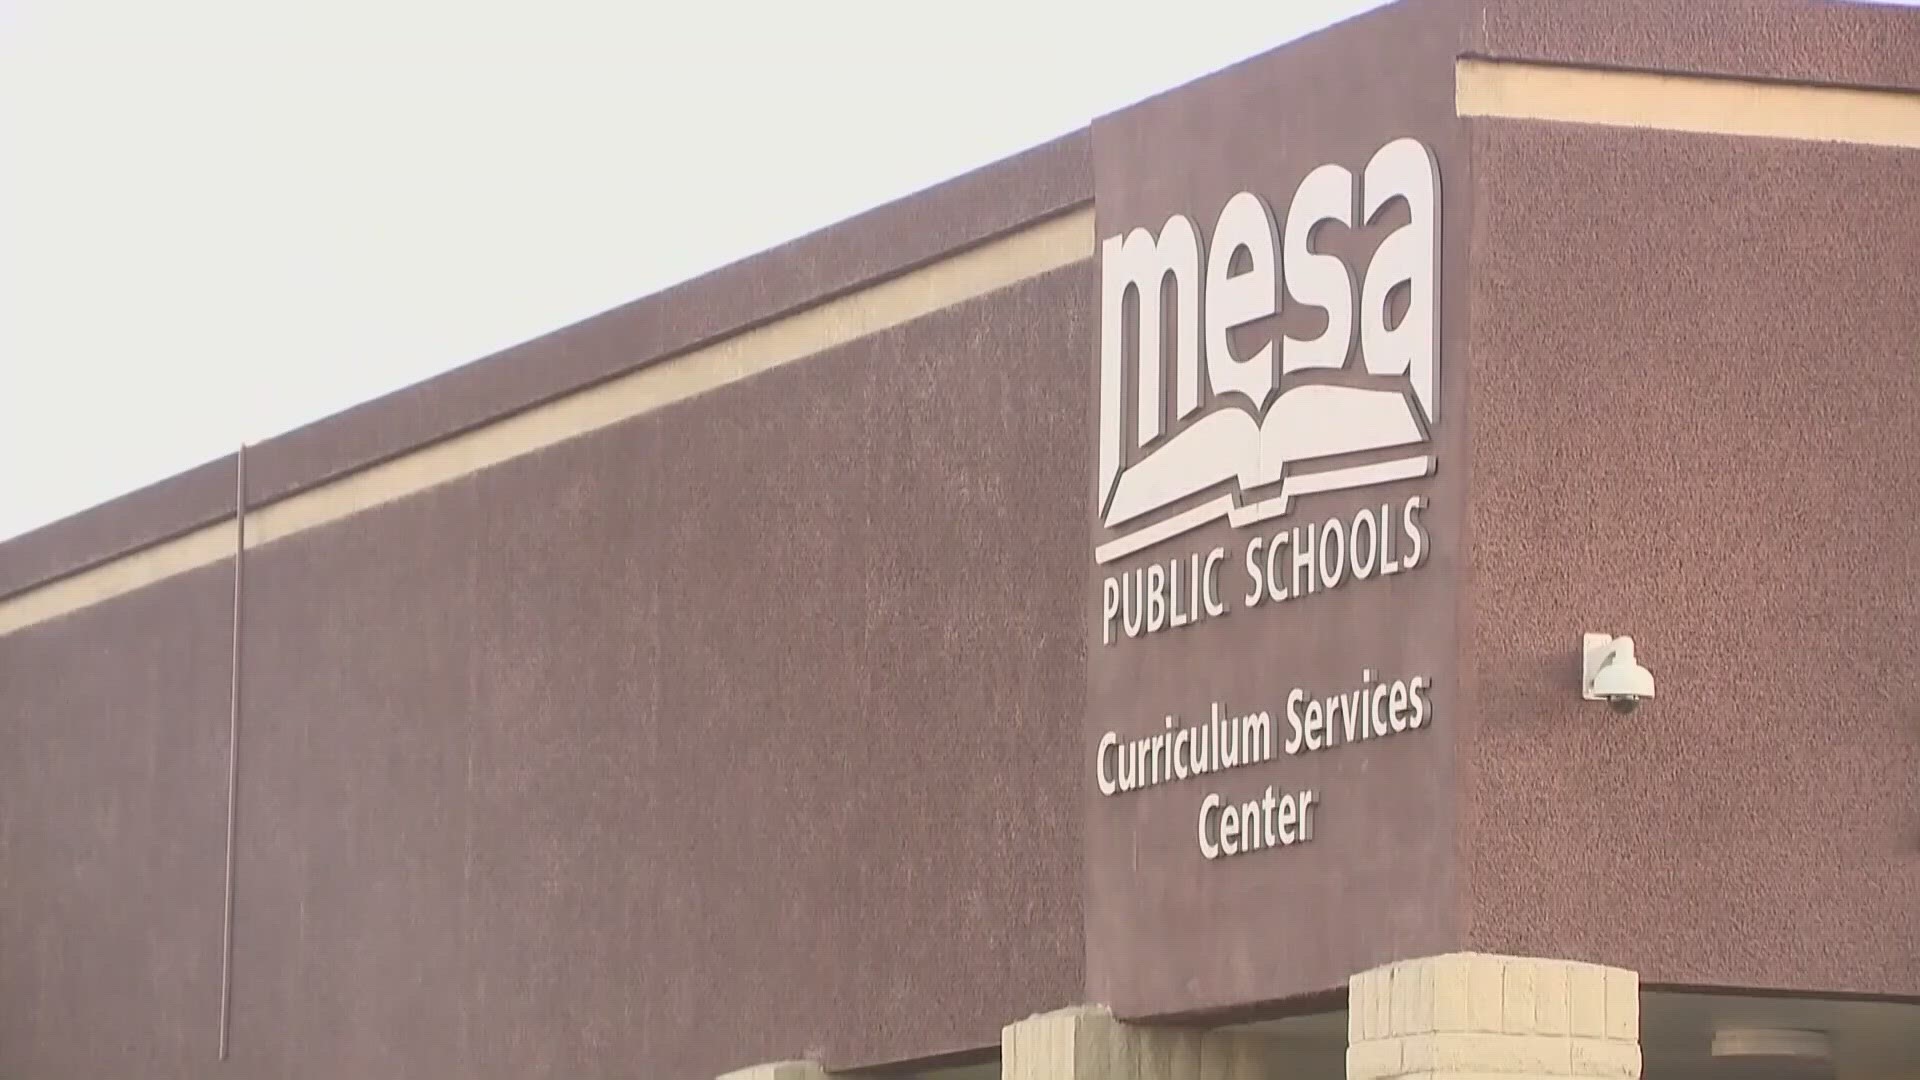 The district's governing board voted last week to begin negotiating with the Amazon founder's preschool program to bring the Bezos Academy to Mesa.